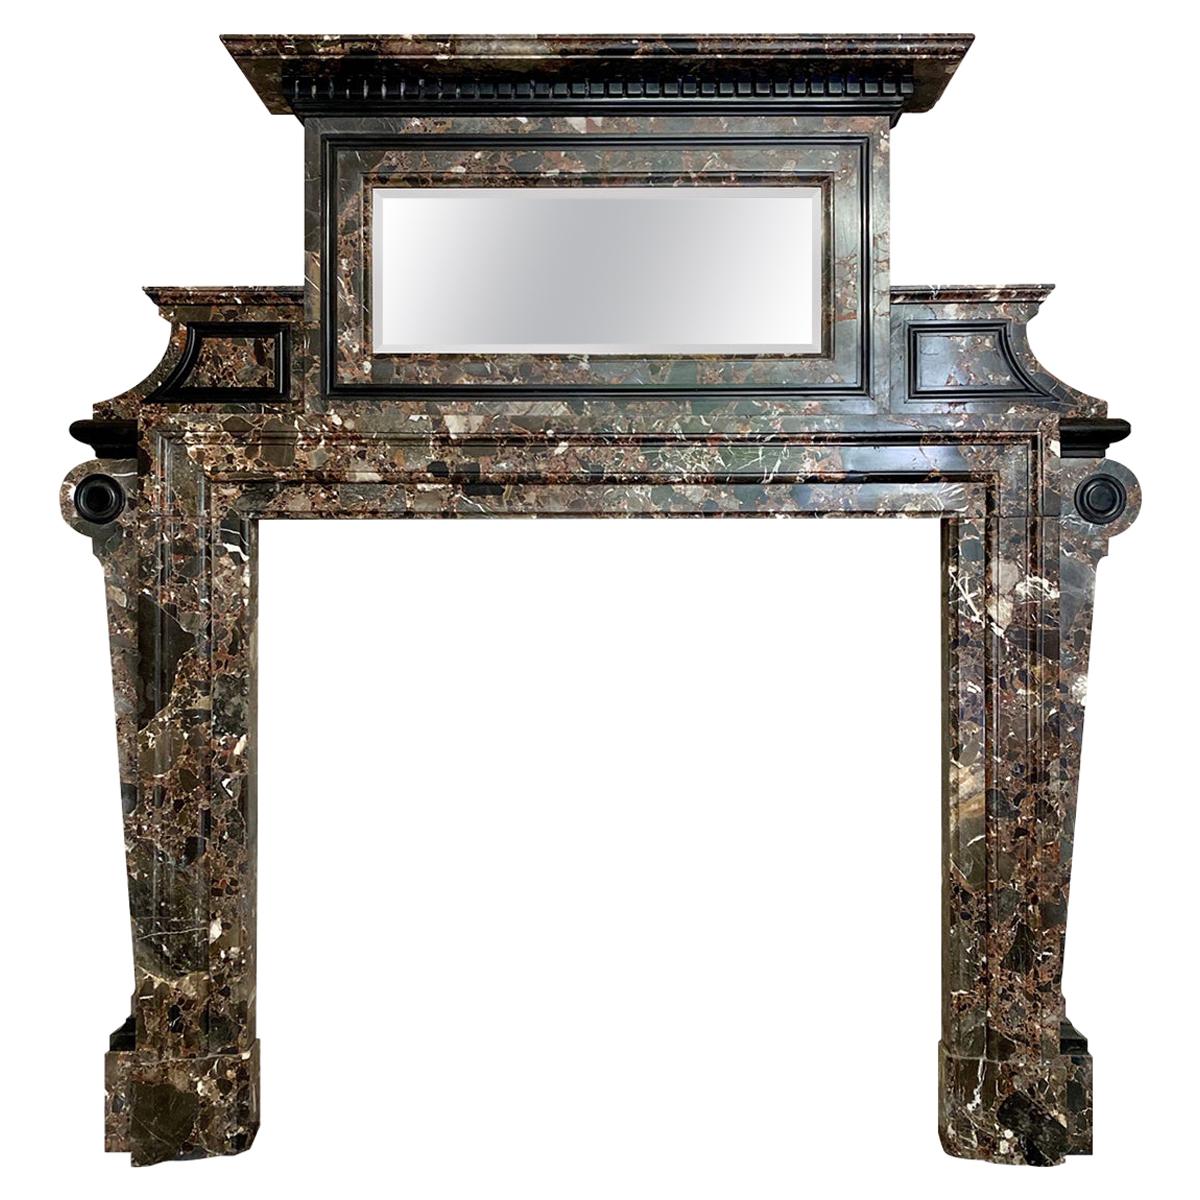 Antique Palladian Style Fireplace Mantel in Marrone Breccia Marble